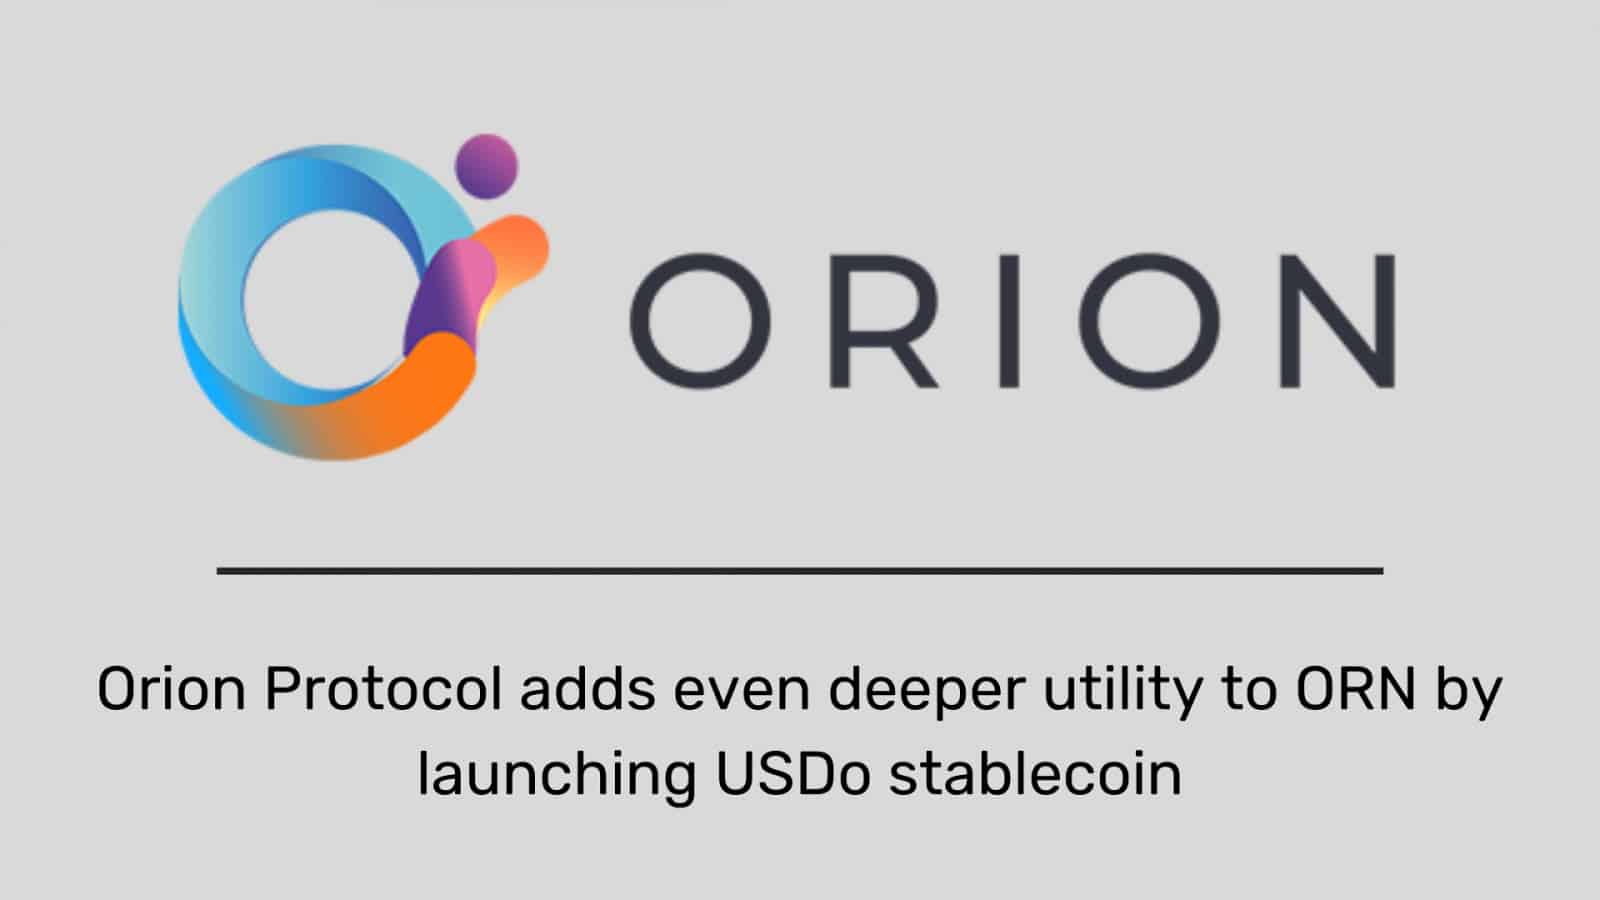 Orion-protocol-adds-even-deeper-utility-to-orn-by-launching-usdo-stablecoin